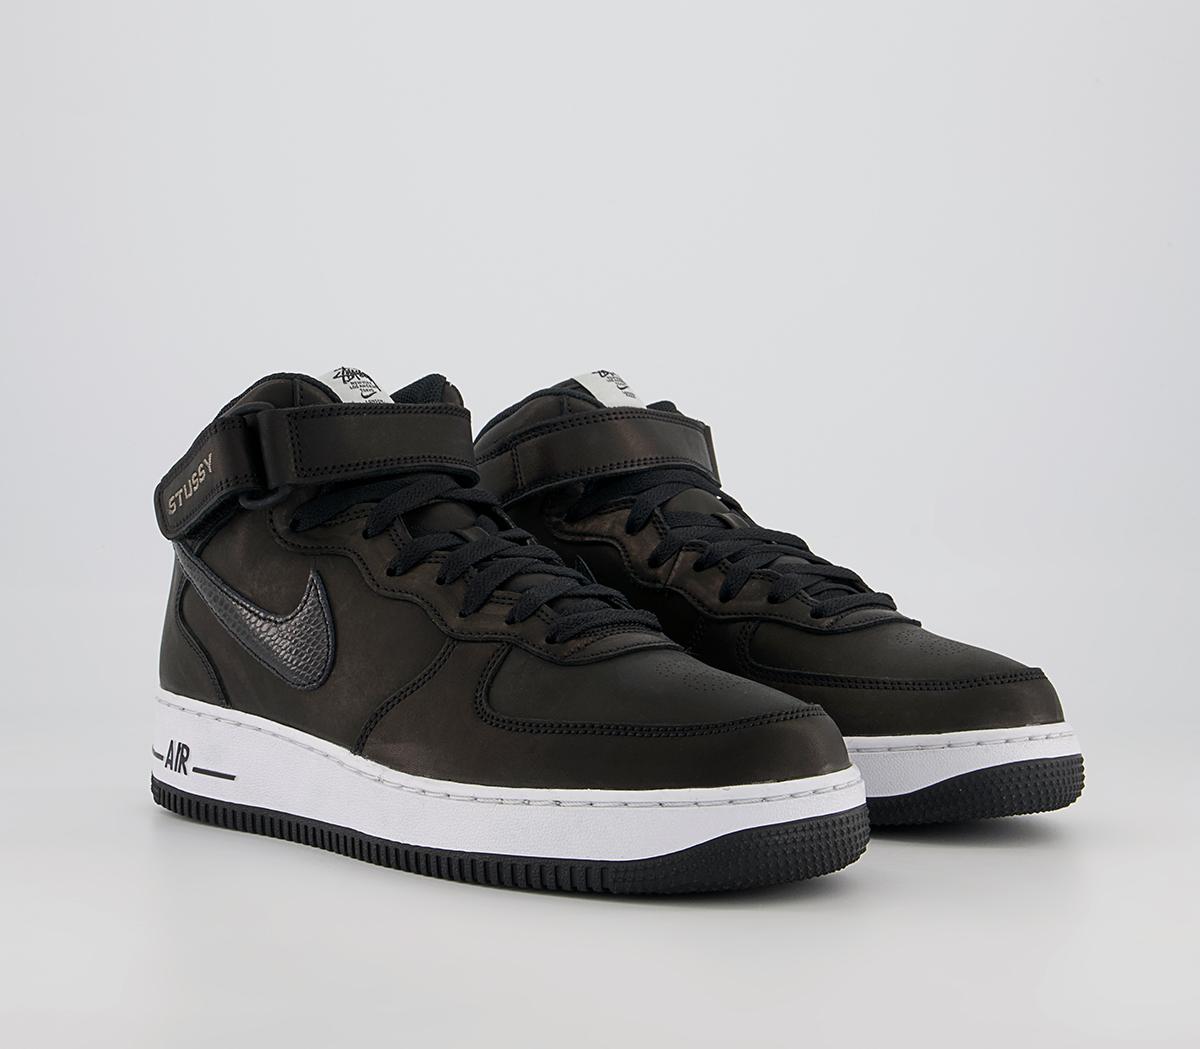 Nike Stussy Nike Air Force 1 Mid Trainers Black - Women's Trainers